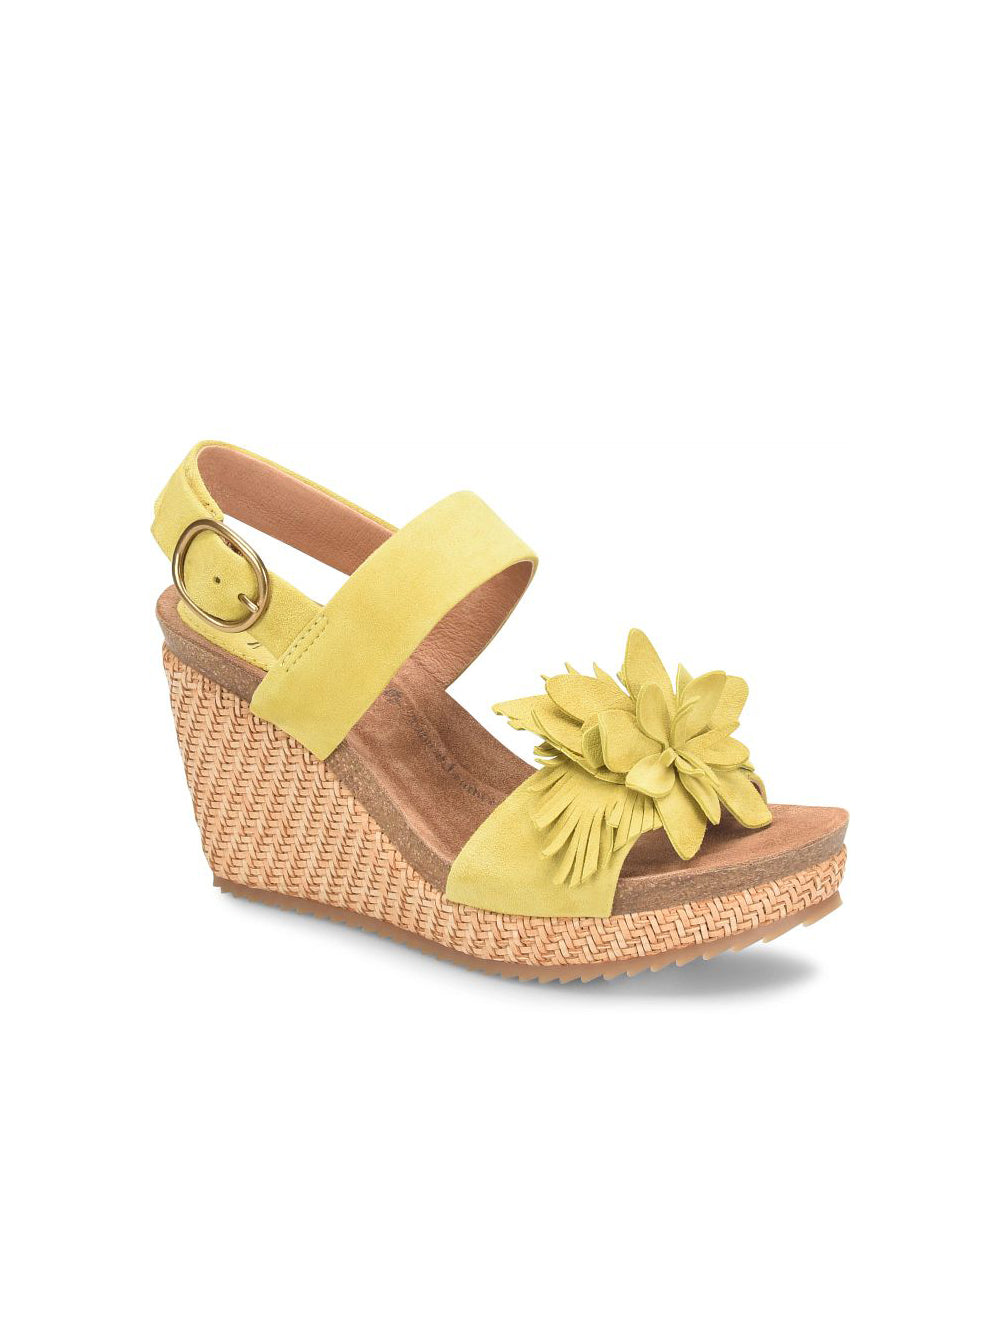 sofft shoes cali flower platform wedge sandals in citron yellow